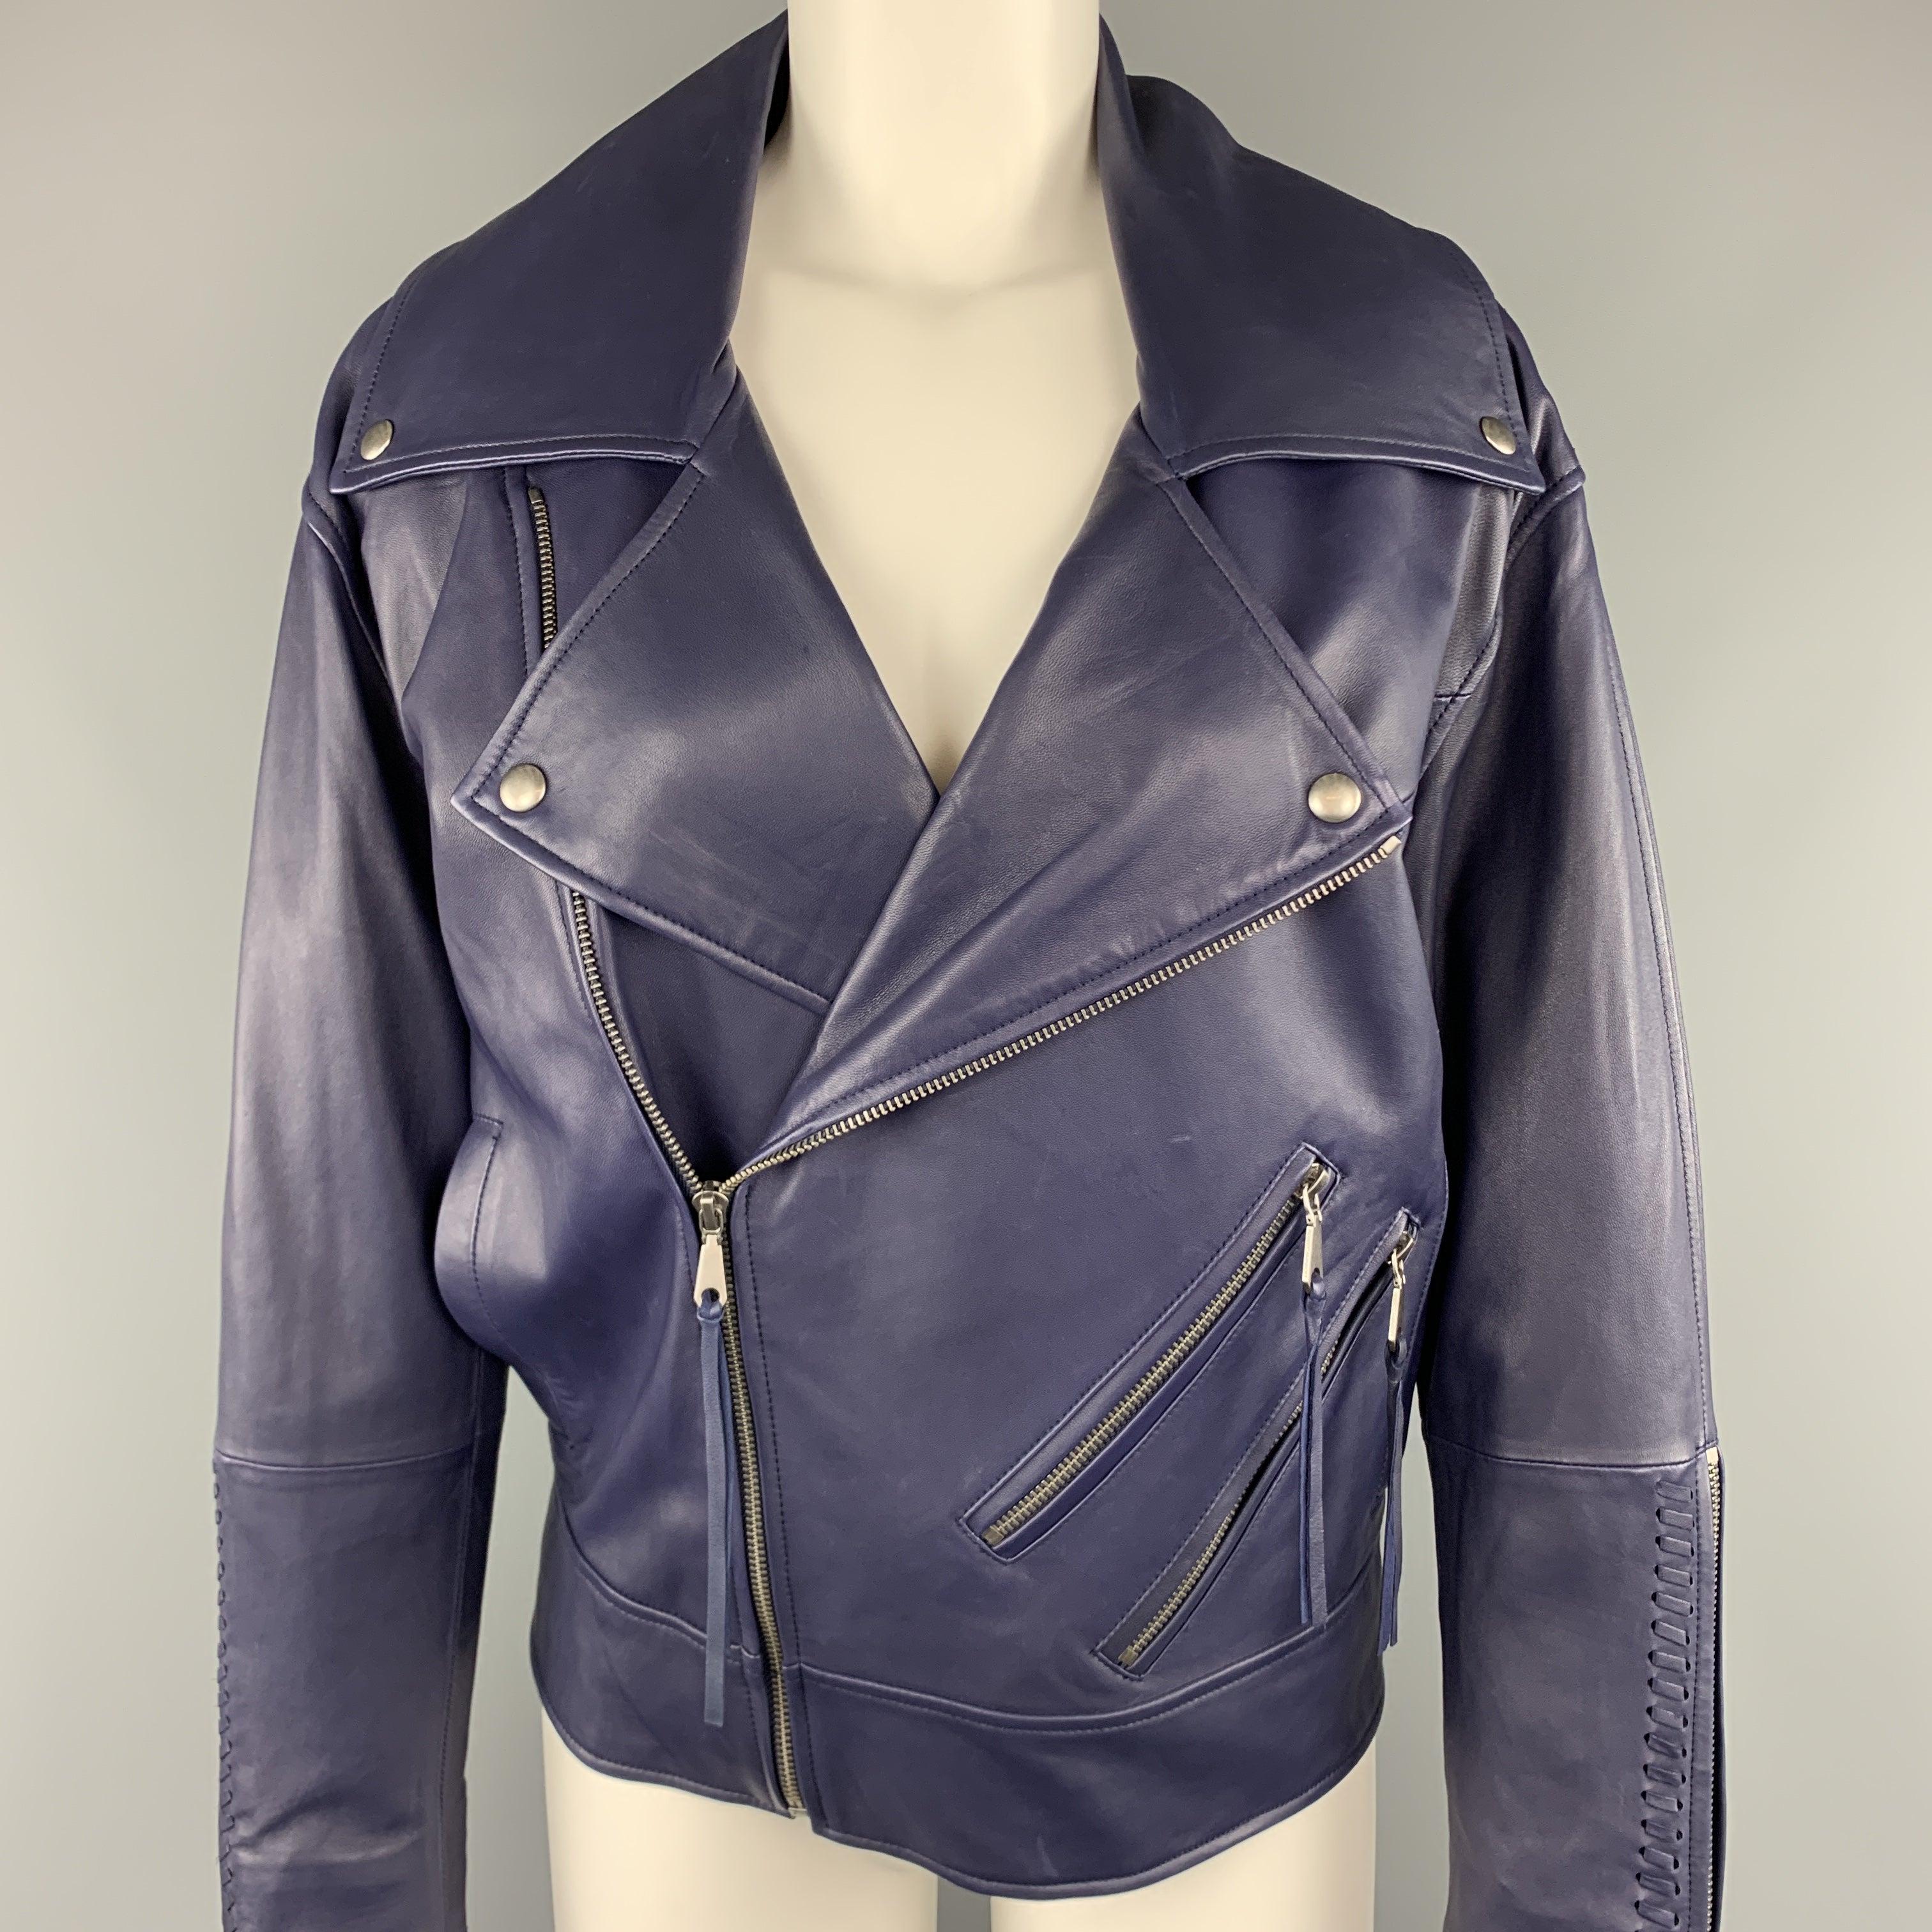 REBECCA MINKOFF biker jacket comes in navy lamb skin leather with a pointed lapel, oversized fit, and whip stitch details.
New With Tags. 

Marked:   XS 

Measurements: 
 
Shoulder: 21 inches Bust:
40 inches Sleeve:
21 inches Length:
24 inches 
  
 